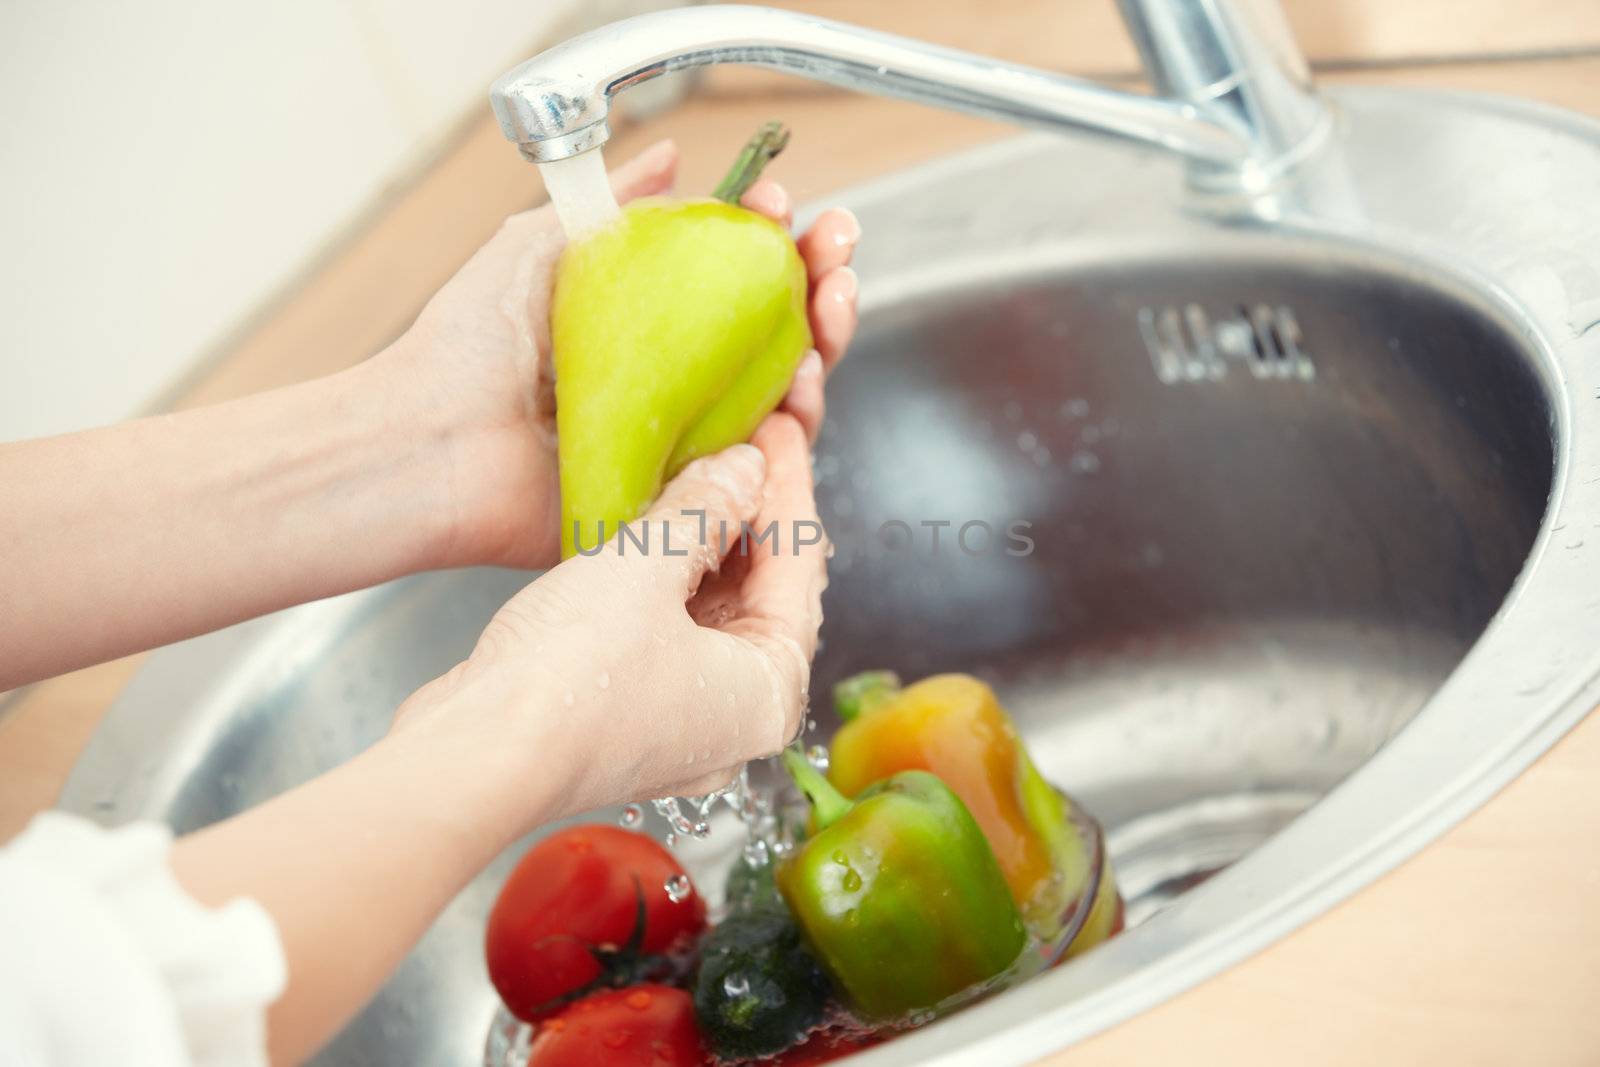 Hands of woman washing vegetables at her kitchen